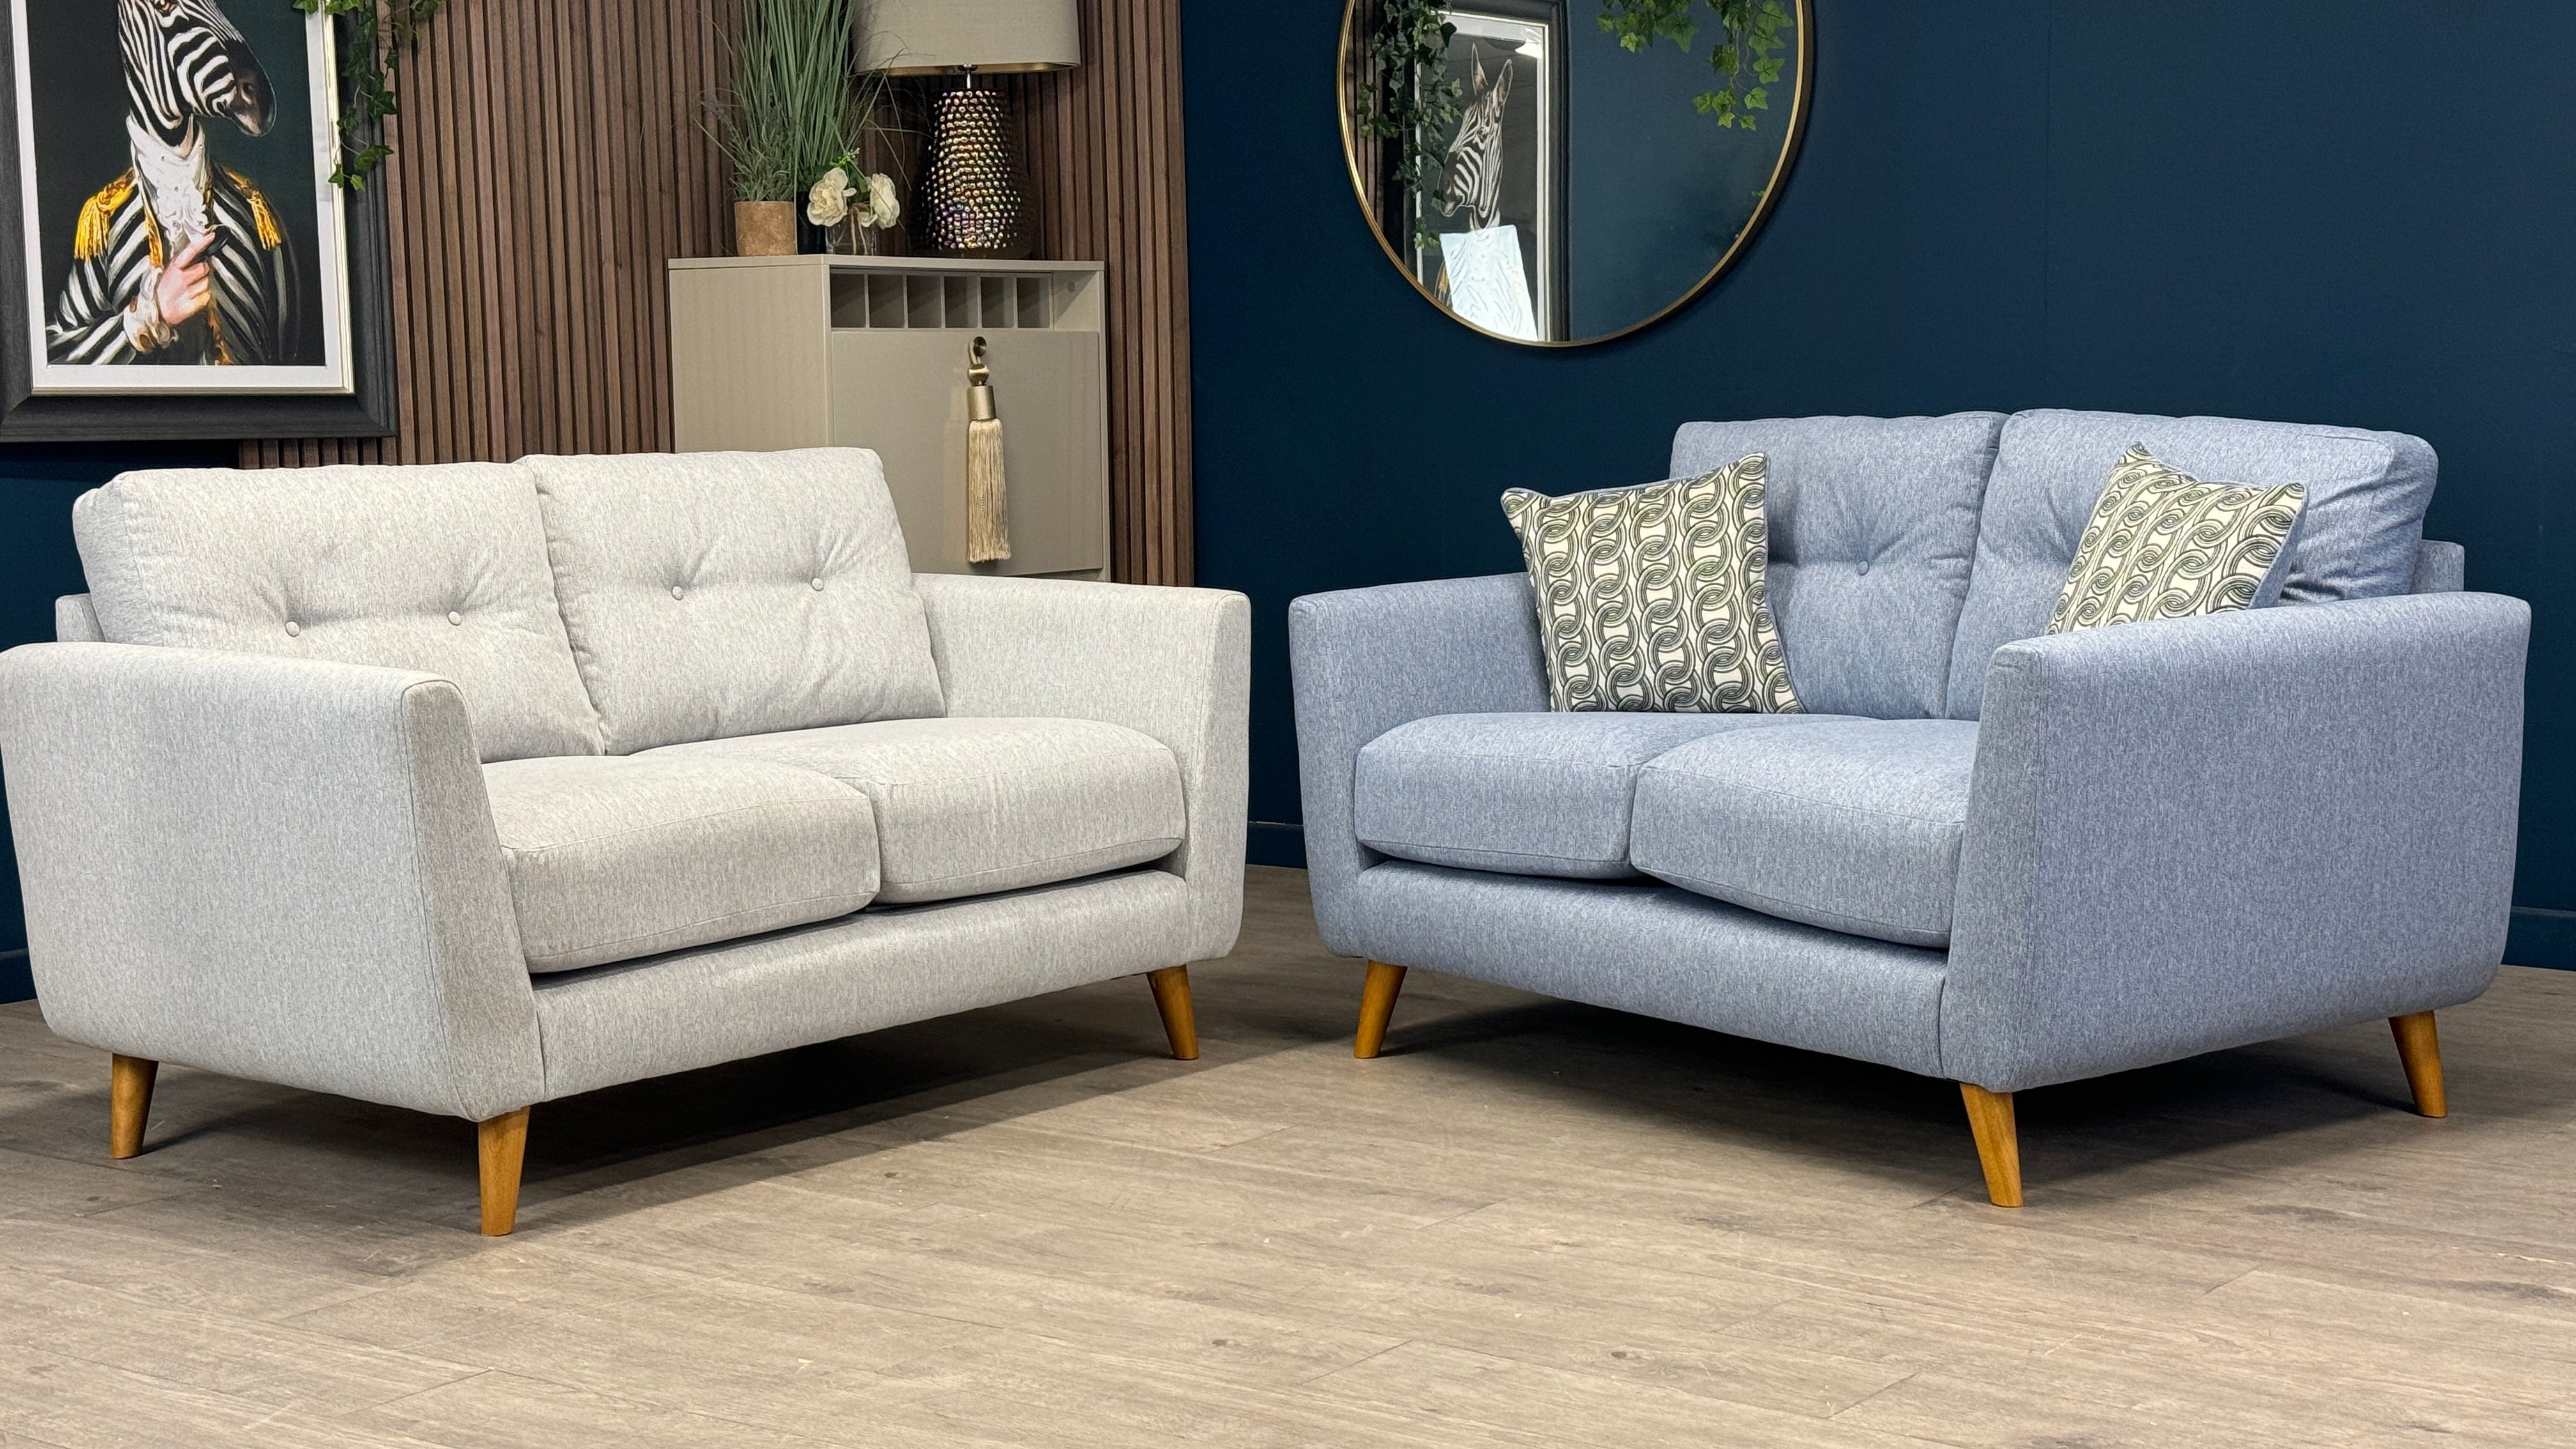 Home Living Outlet sofa